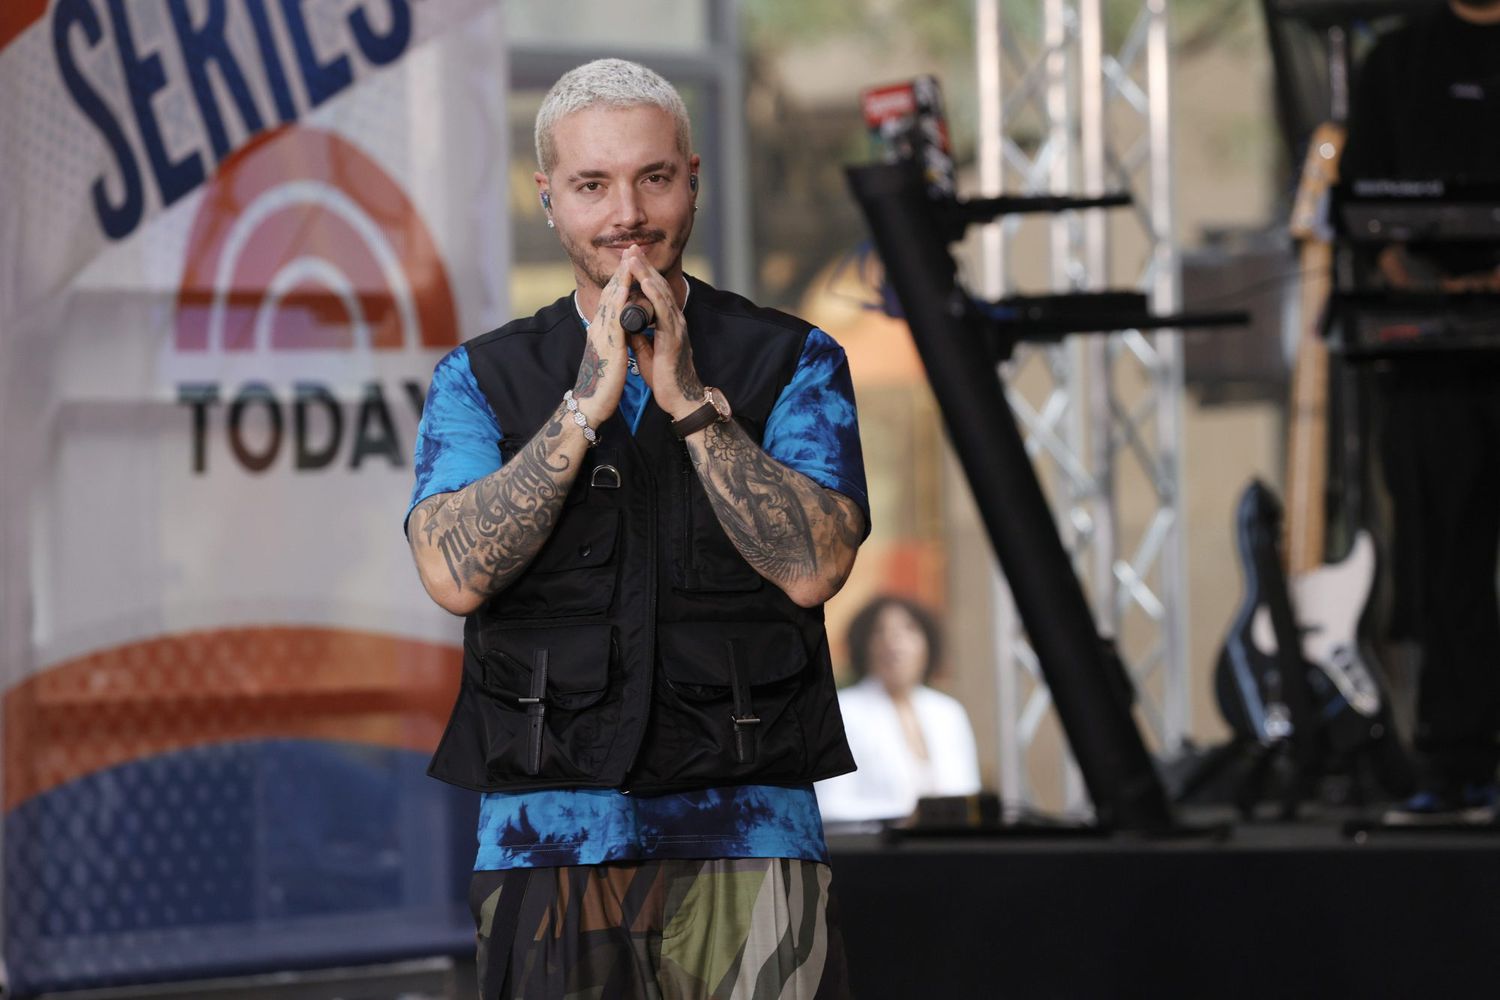 J Balvin Performs On NBC's "Today"